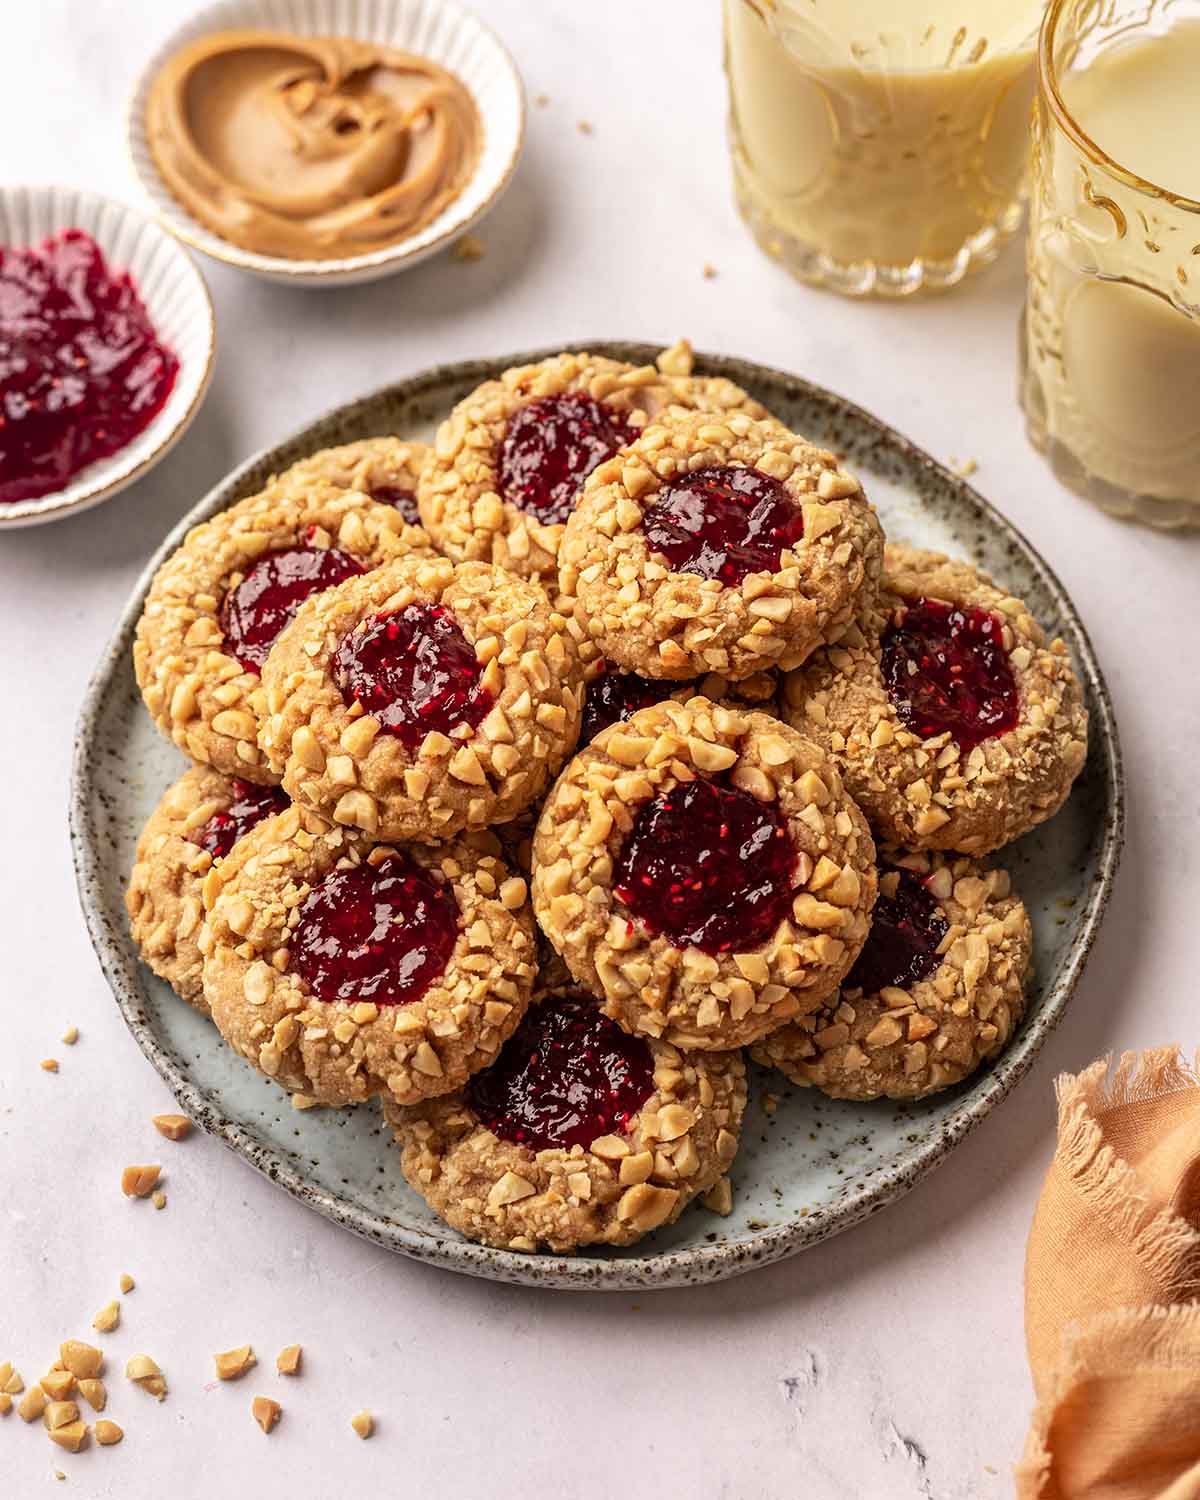 Peanut butter and jelly cookies on speckled plate.